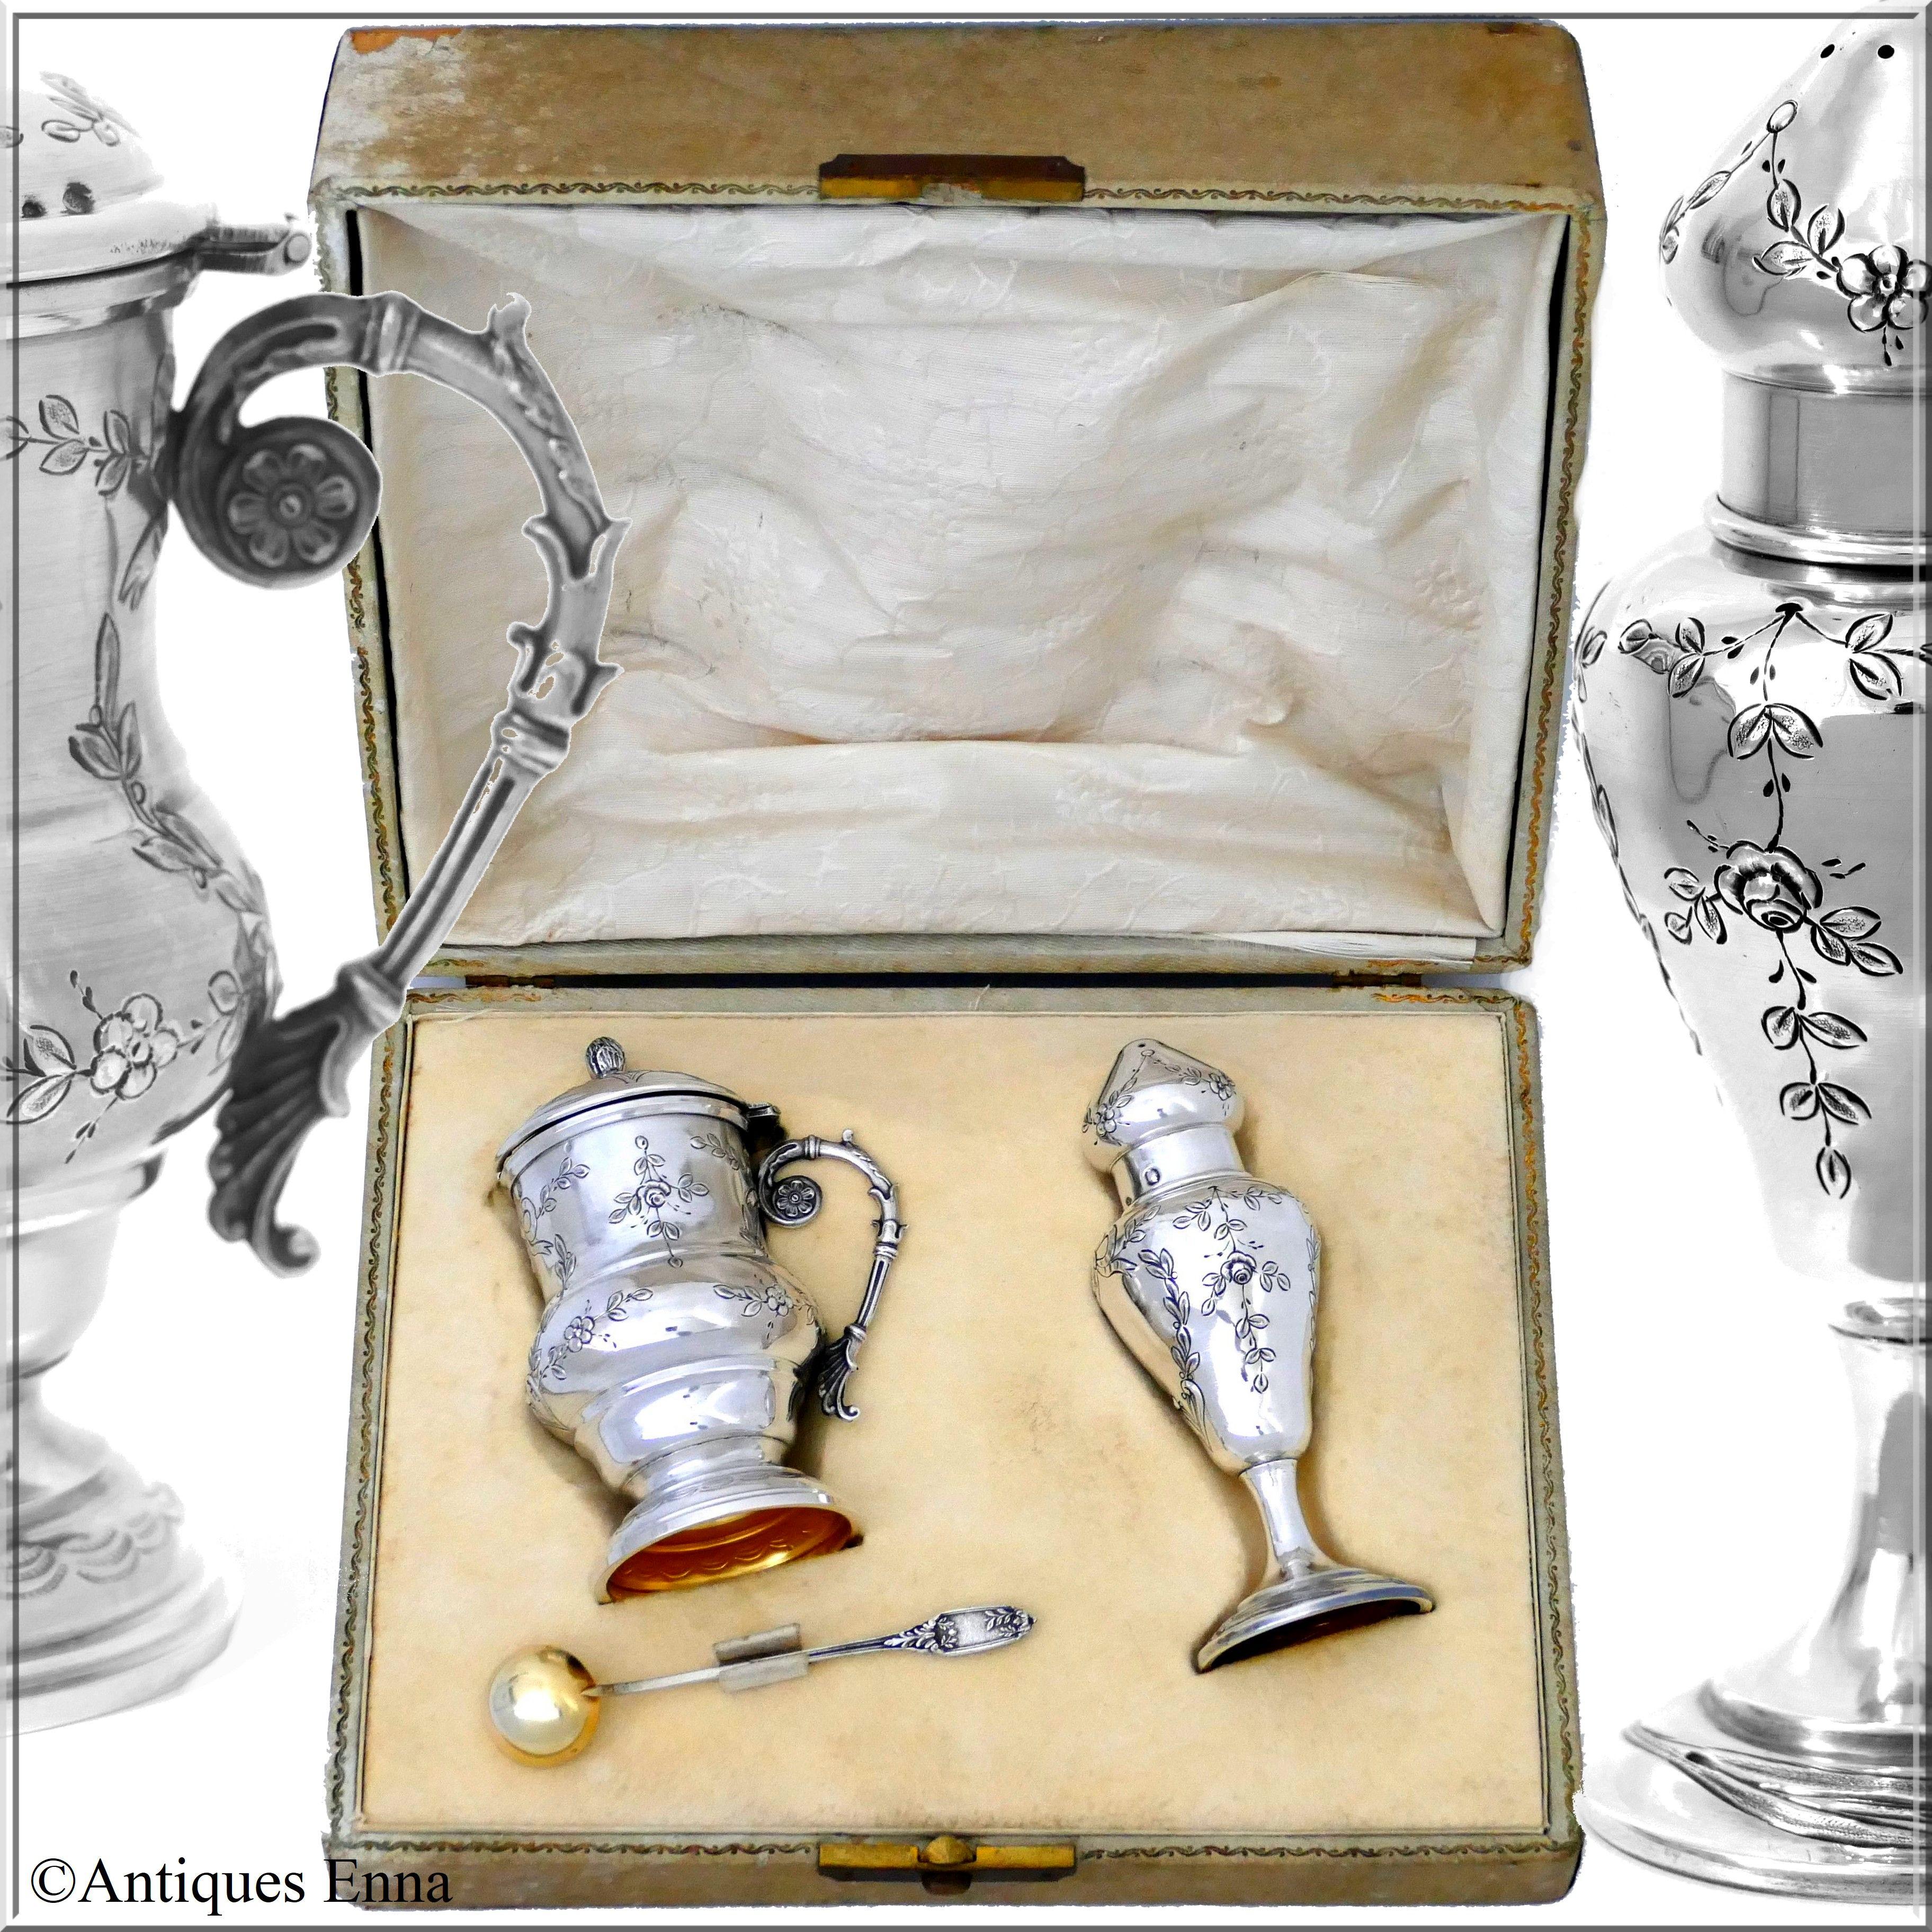 Head of Minerve 1 st titre for 950/1000 French sterling silver vermeil guarantee on the mustard pot and sugar caster. The quality of the gold used to recover sterling silver is a minimum of 750 mils (18-karat). Boar's head for 800/1000 French